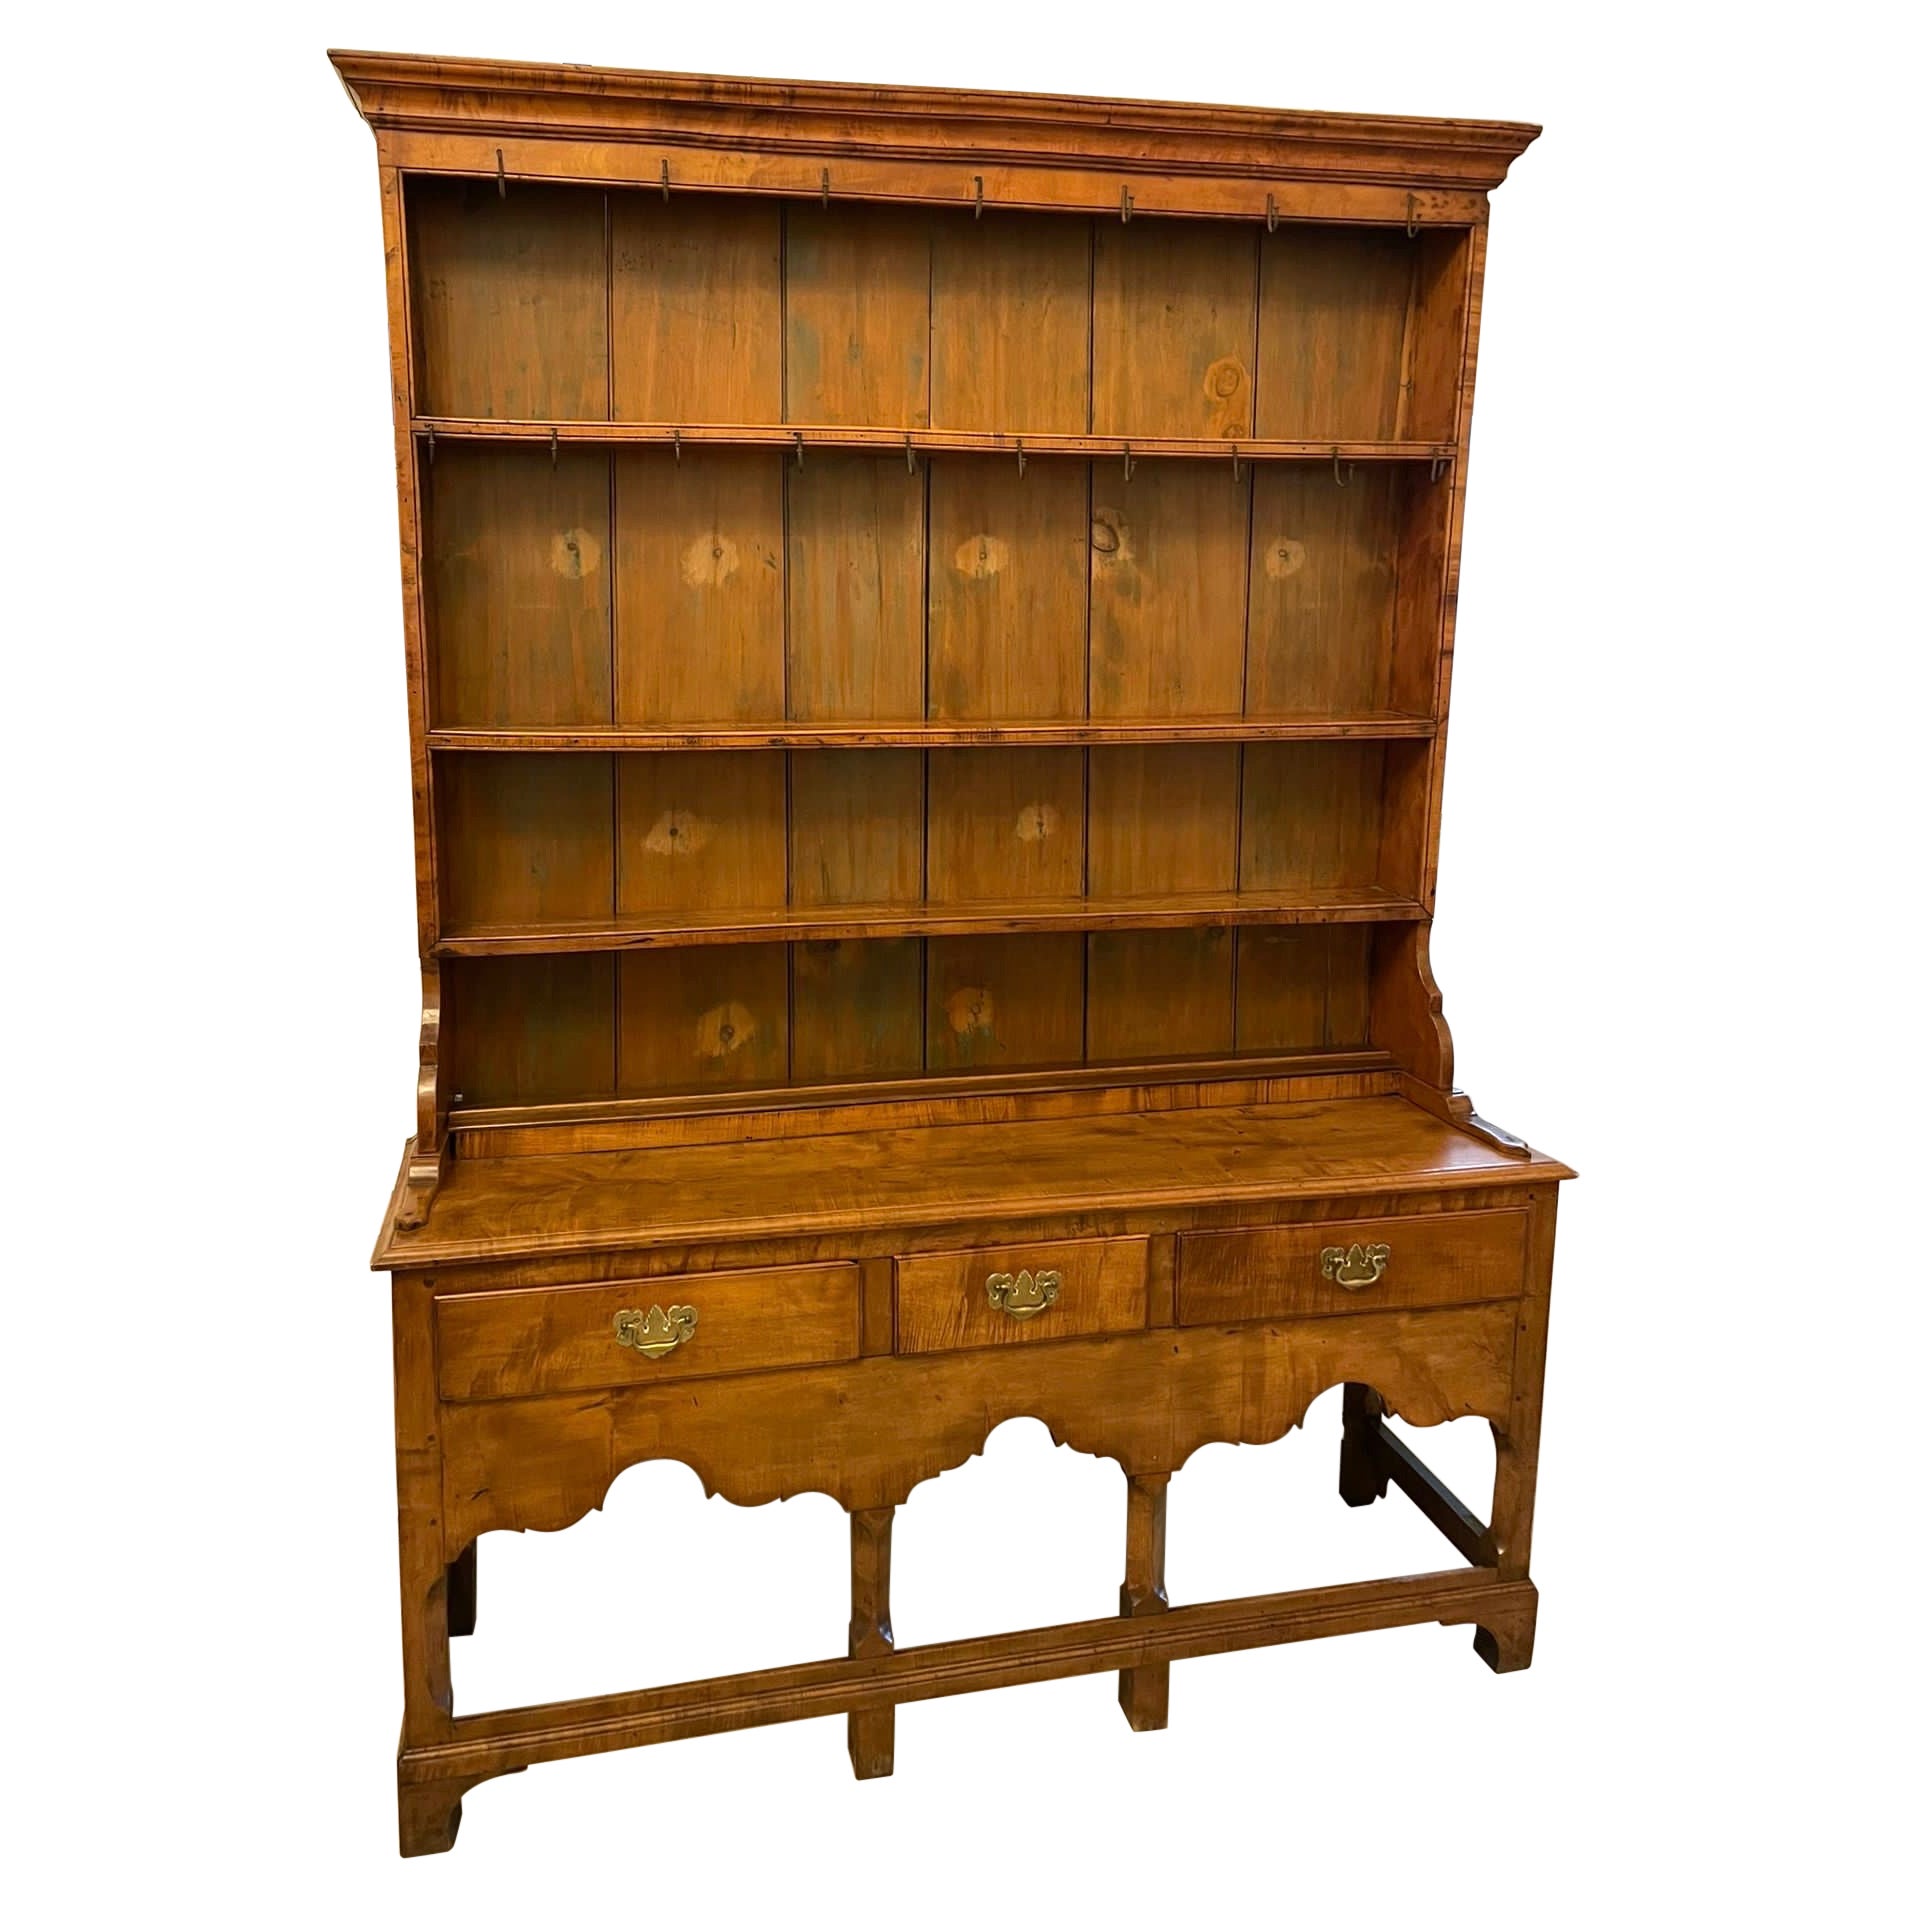 Rare American Antique George III Quality Solid Maple Wood Dresser and Rack For Sale